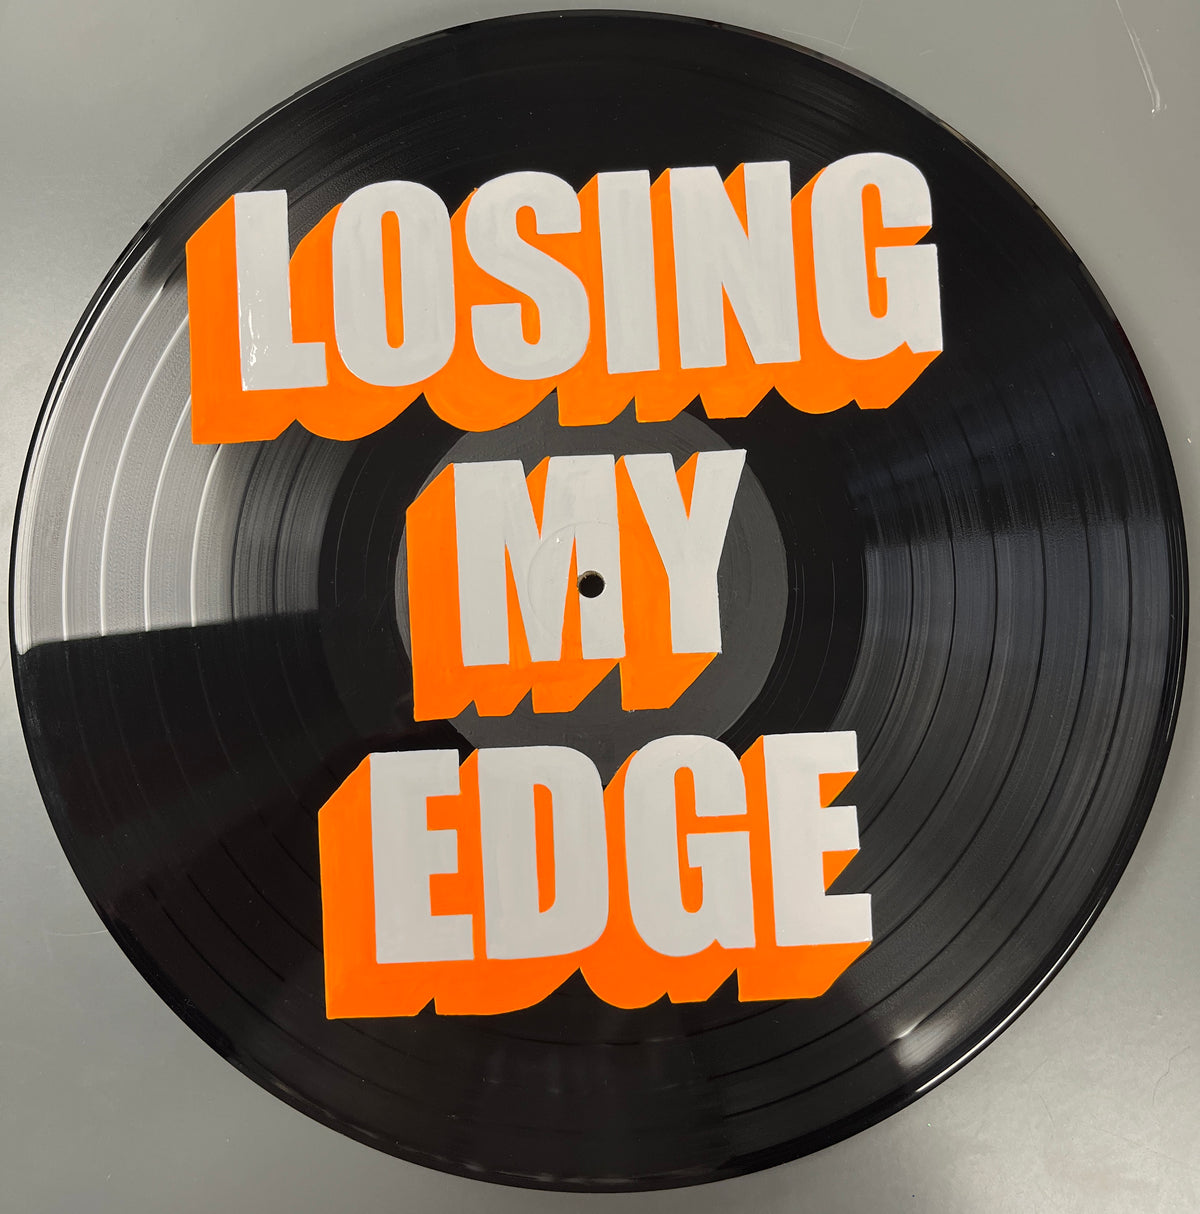 Losing My Edge by Populuxe